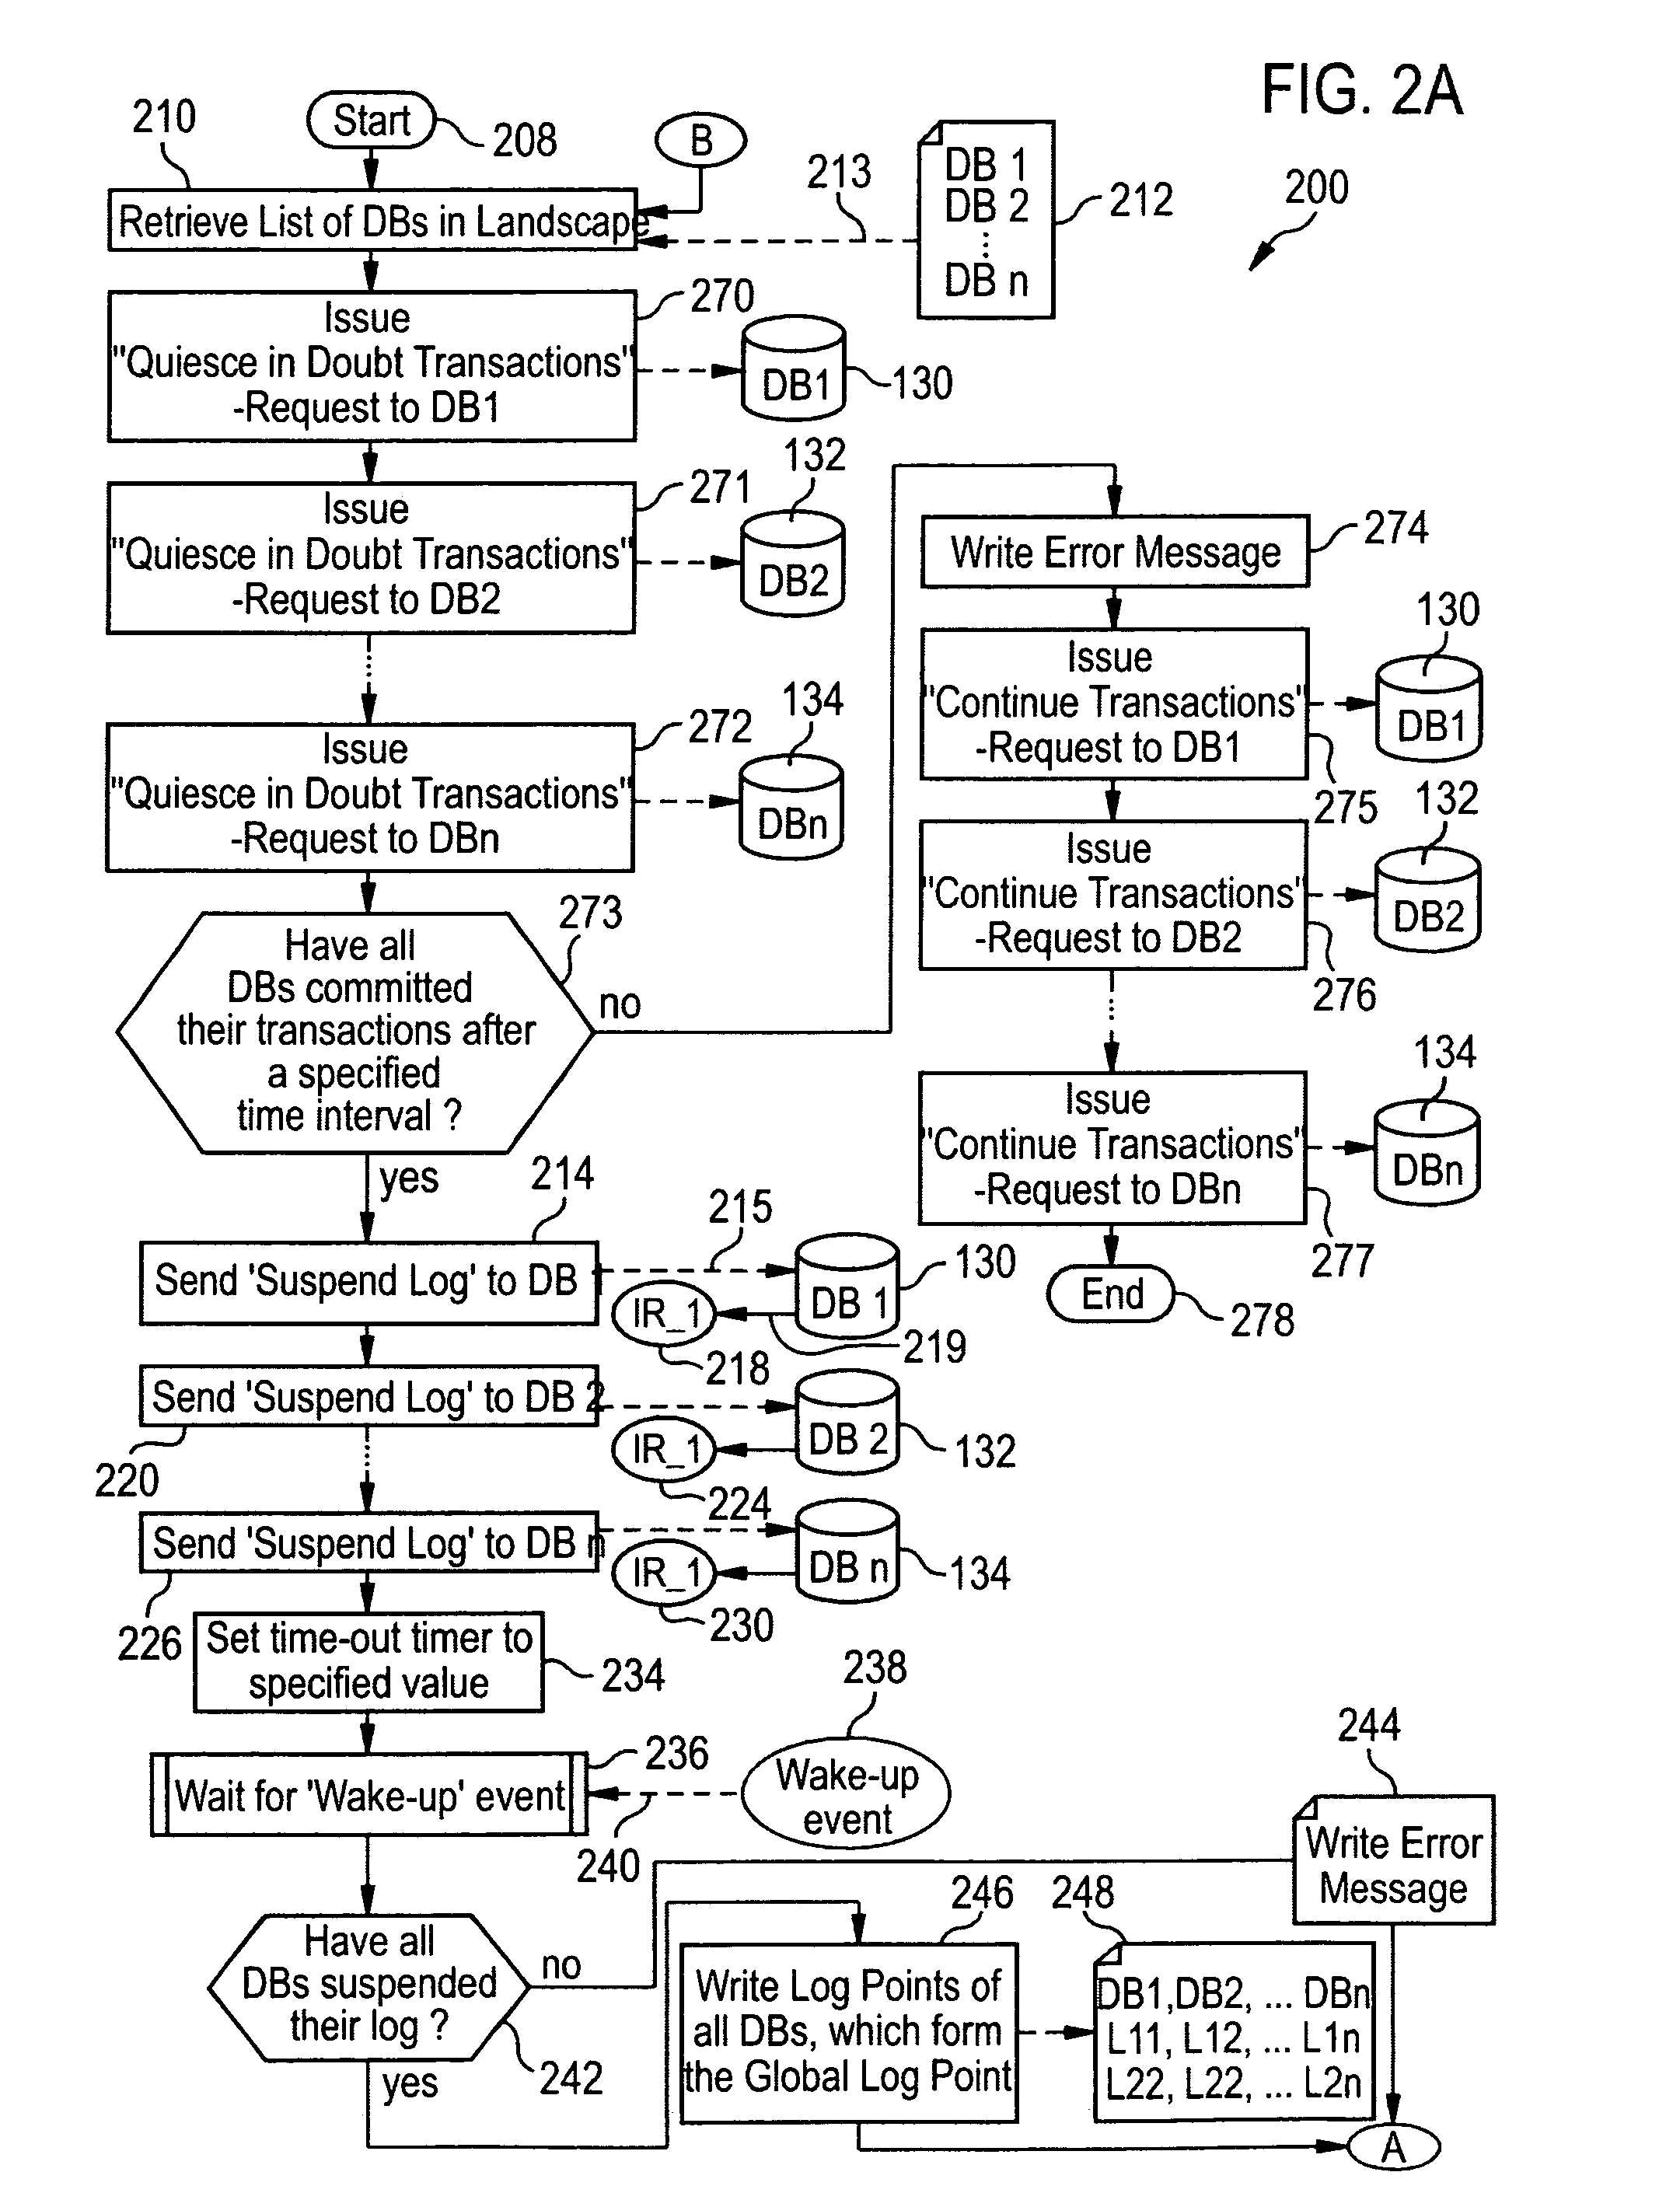 Method and information technology infrastructure for establishing a log point for automatic recovery of federated databases to a prior point in time